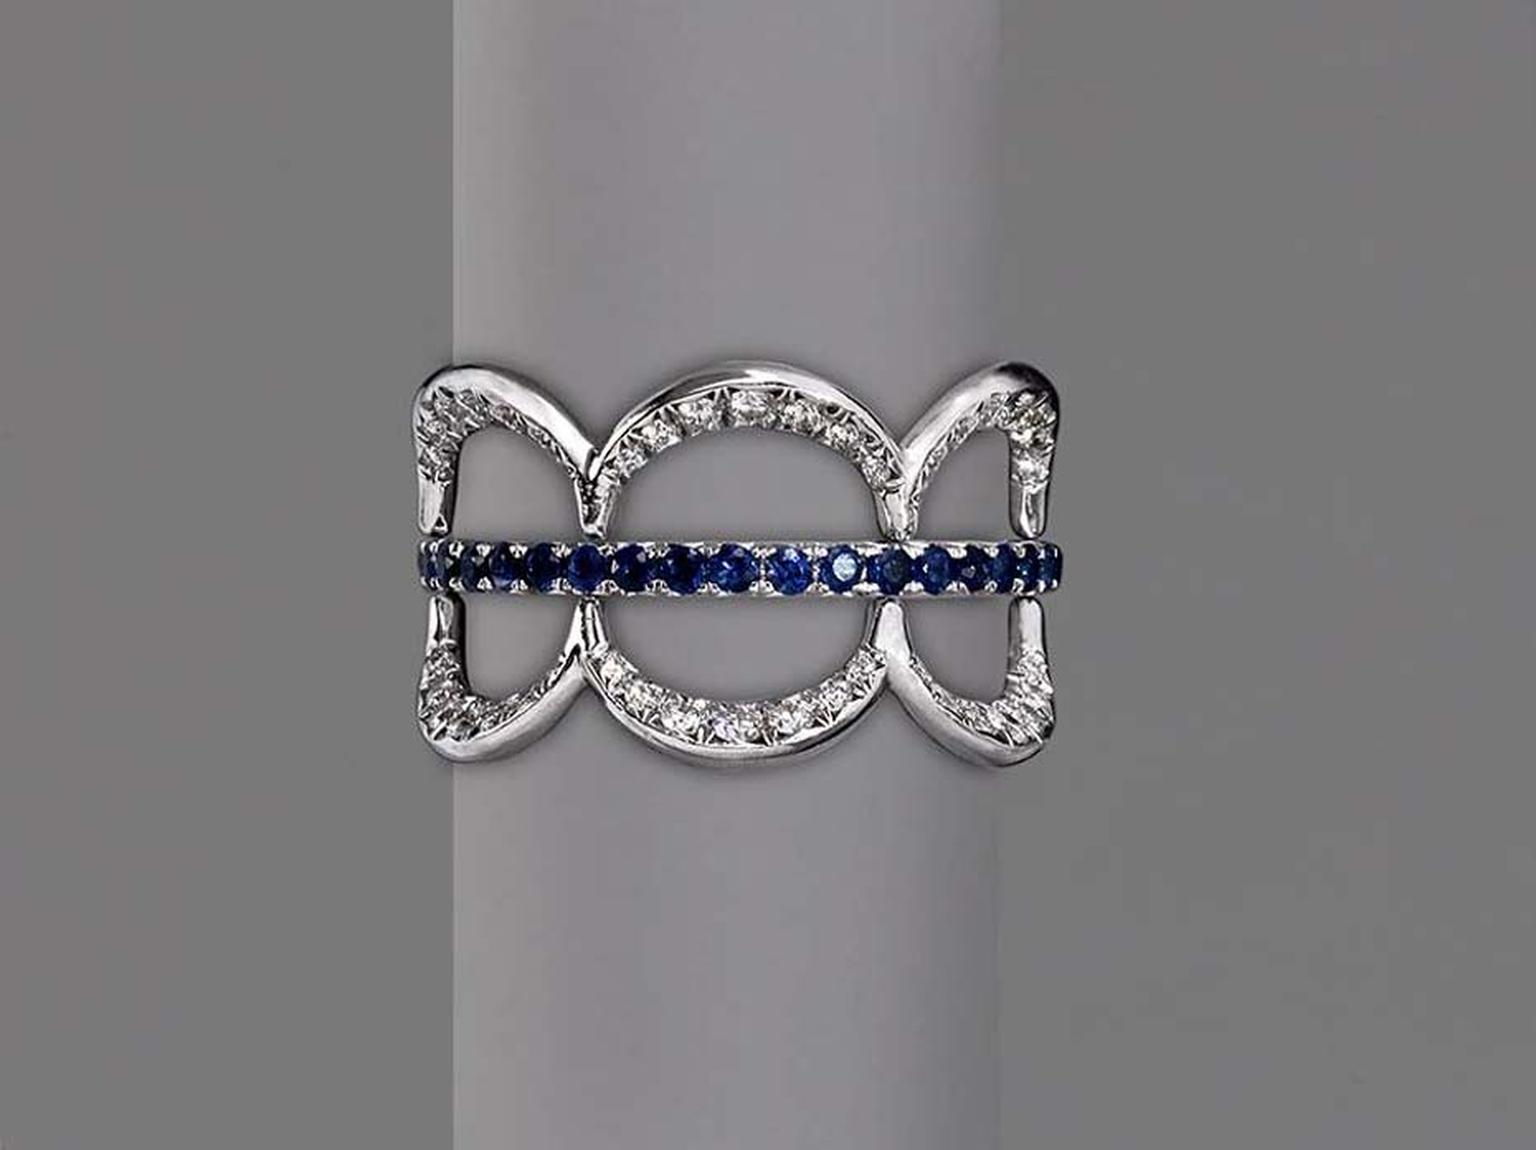 Jado Crown ring in white gold with diamonds and sapphires.